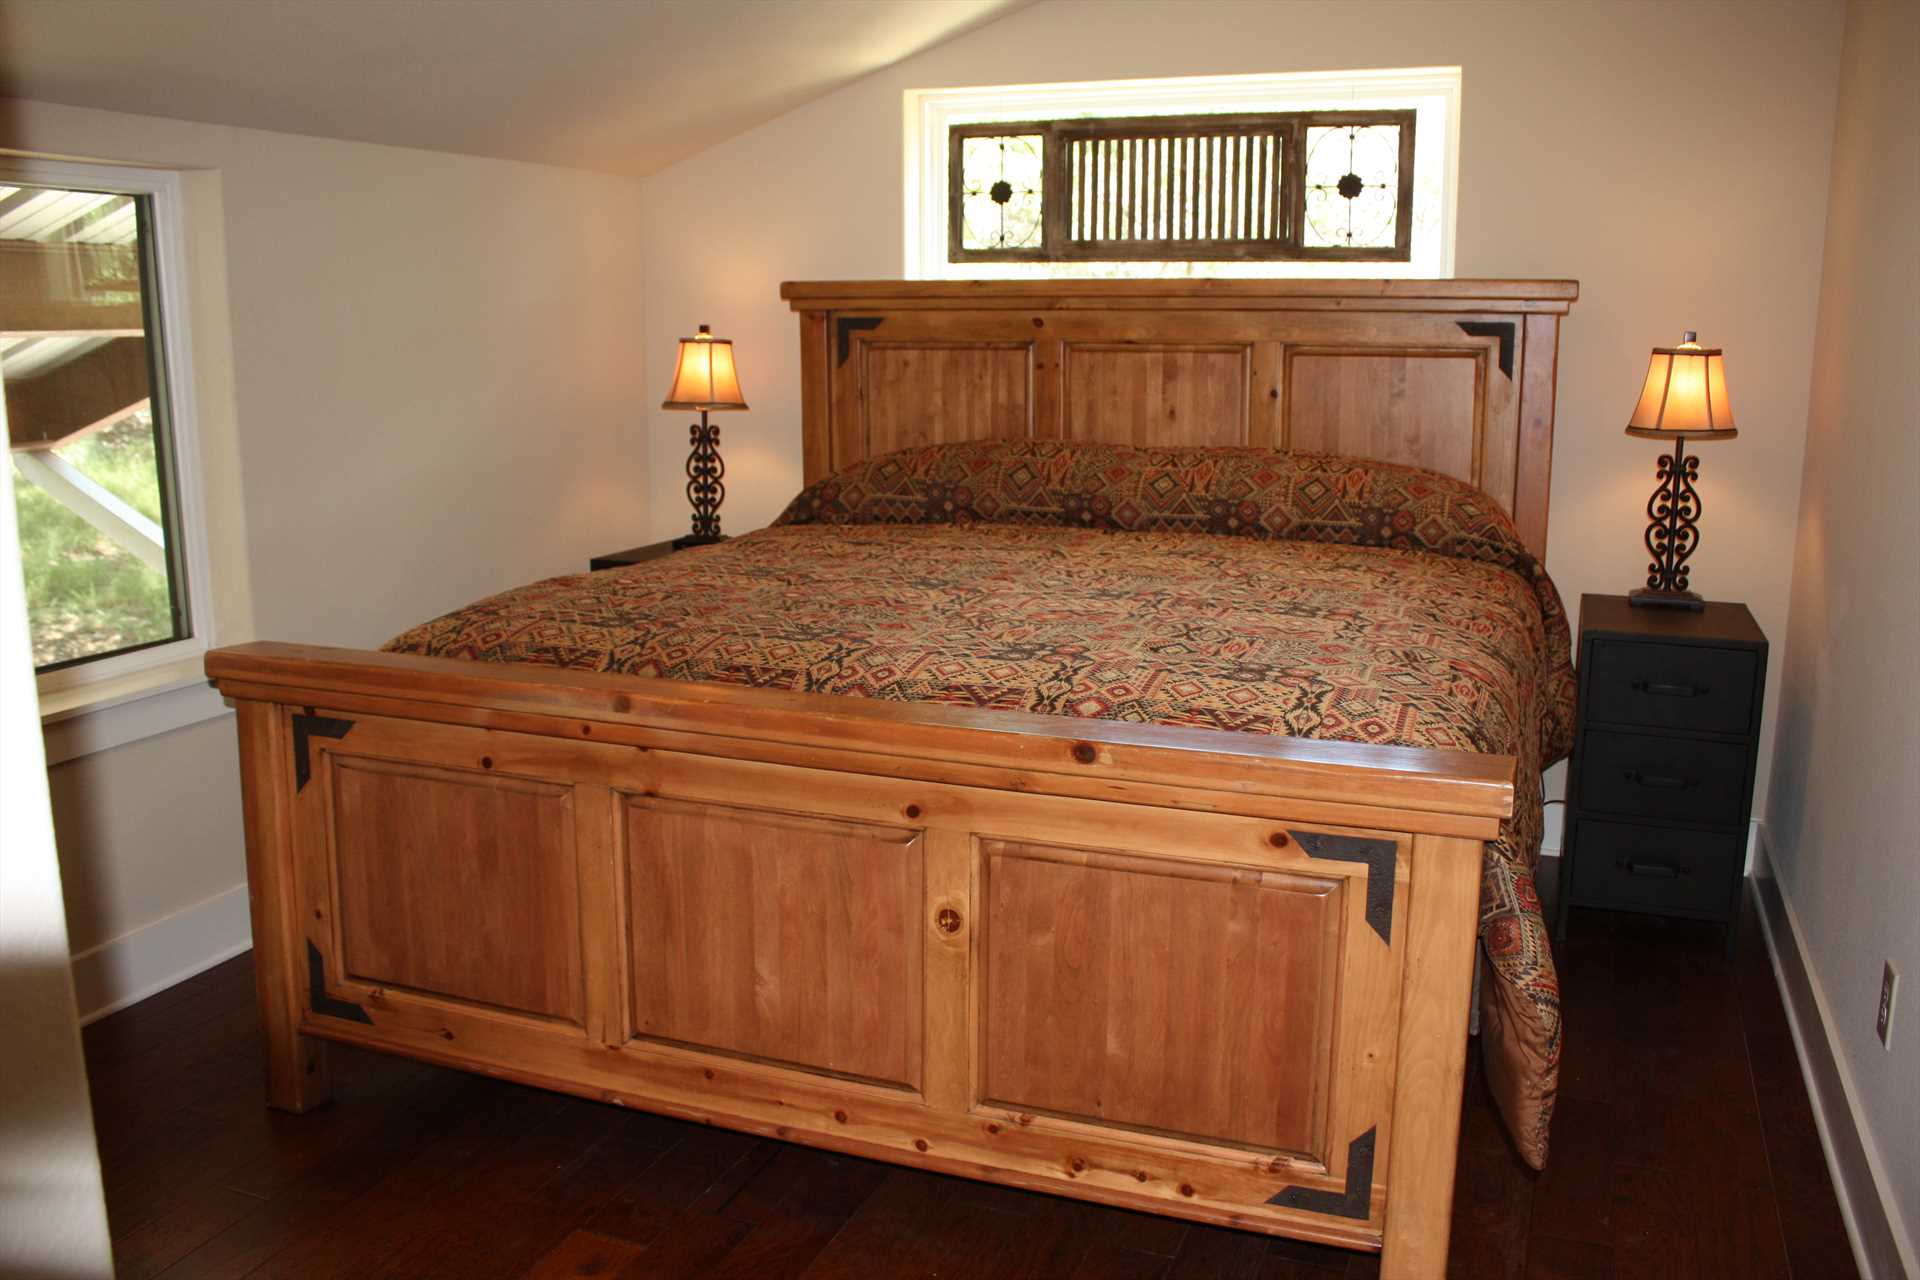                                                 Another plush king-sized bed is located in the second bedroom, providing sumptuous rest for two guests.